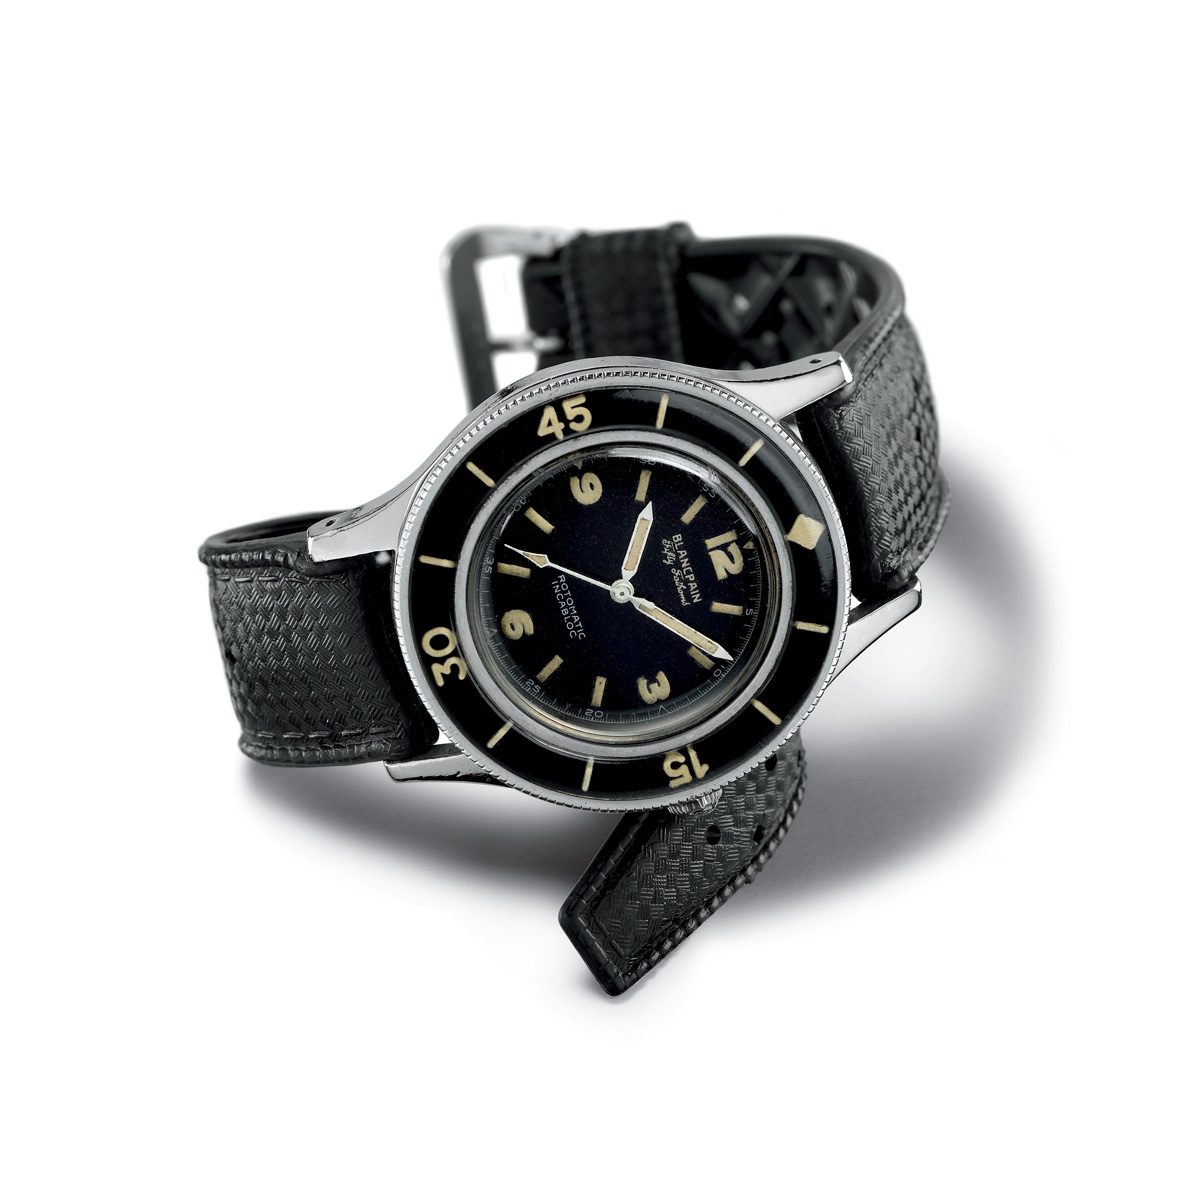 Blancpain celebrates 70th anniversary of the first diving watch –